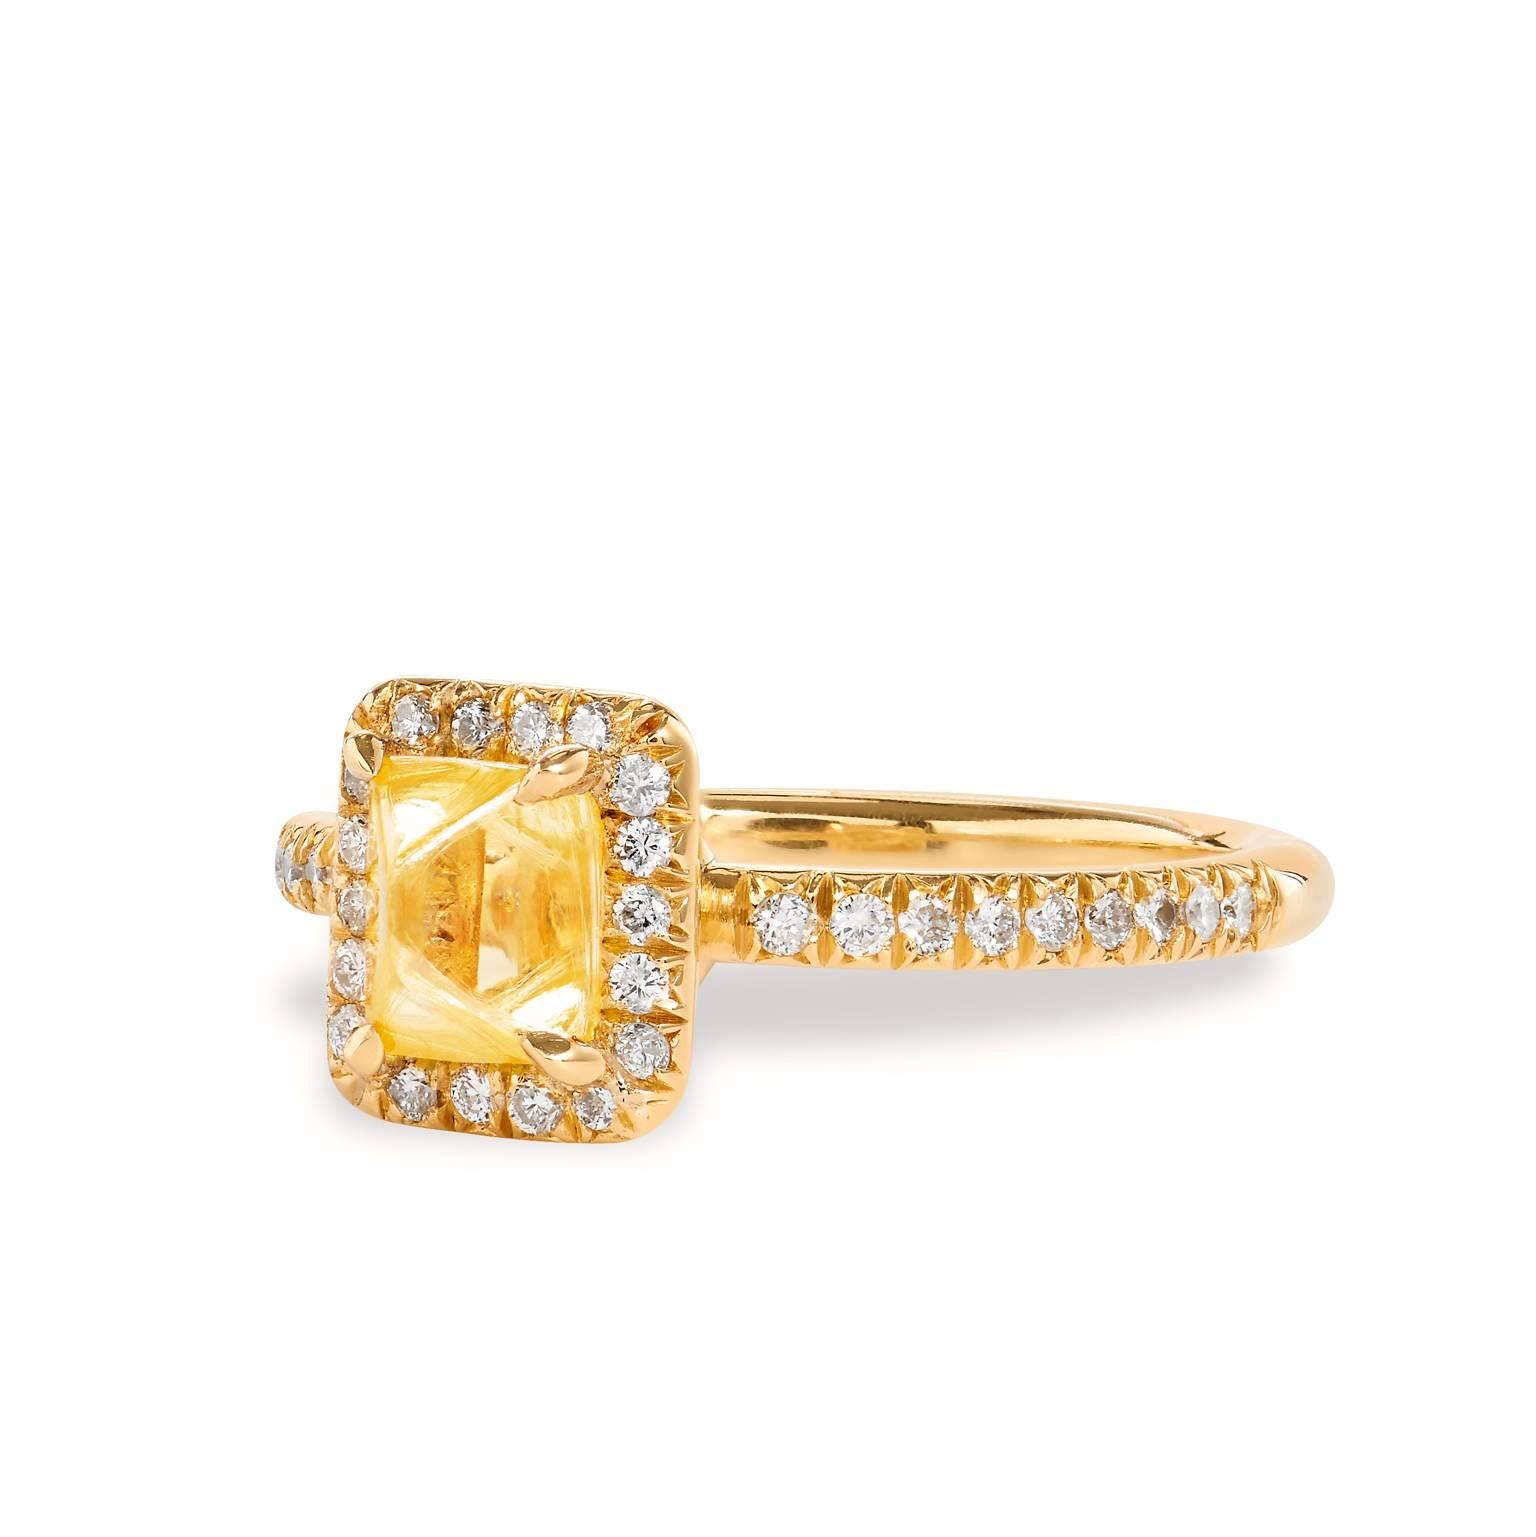 This handmade 18 karat yellow gold ring showcases a 1.20 carat fancy yellow rough diamond highlighted by 0.26 carat of pave diamond that encircle center diamond and trail down the shank (G/H SI).
